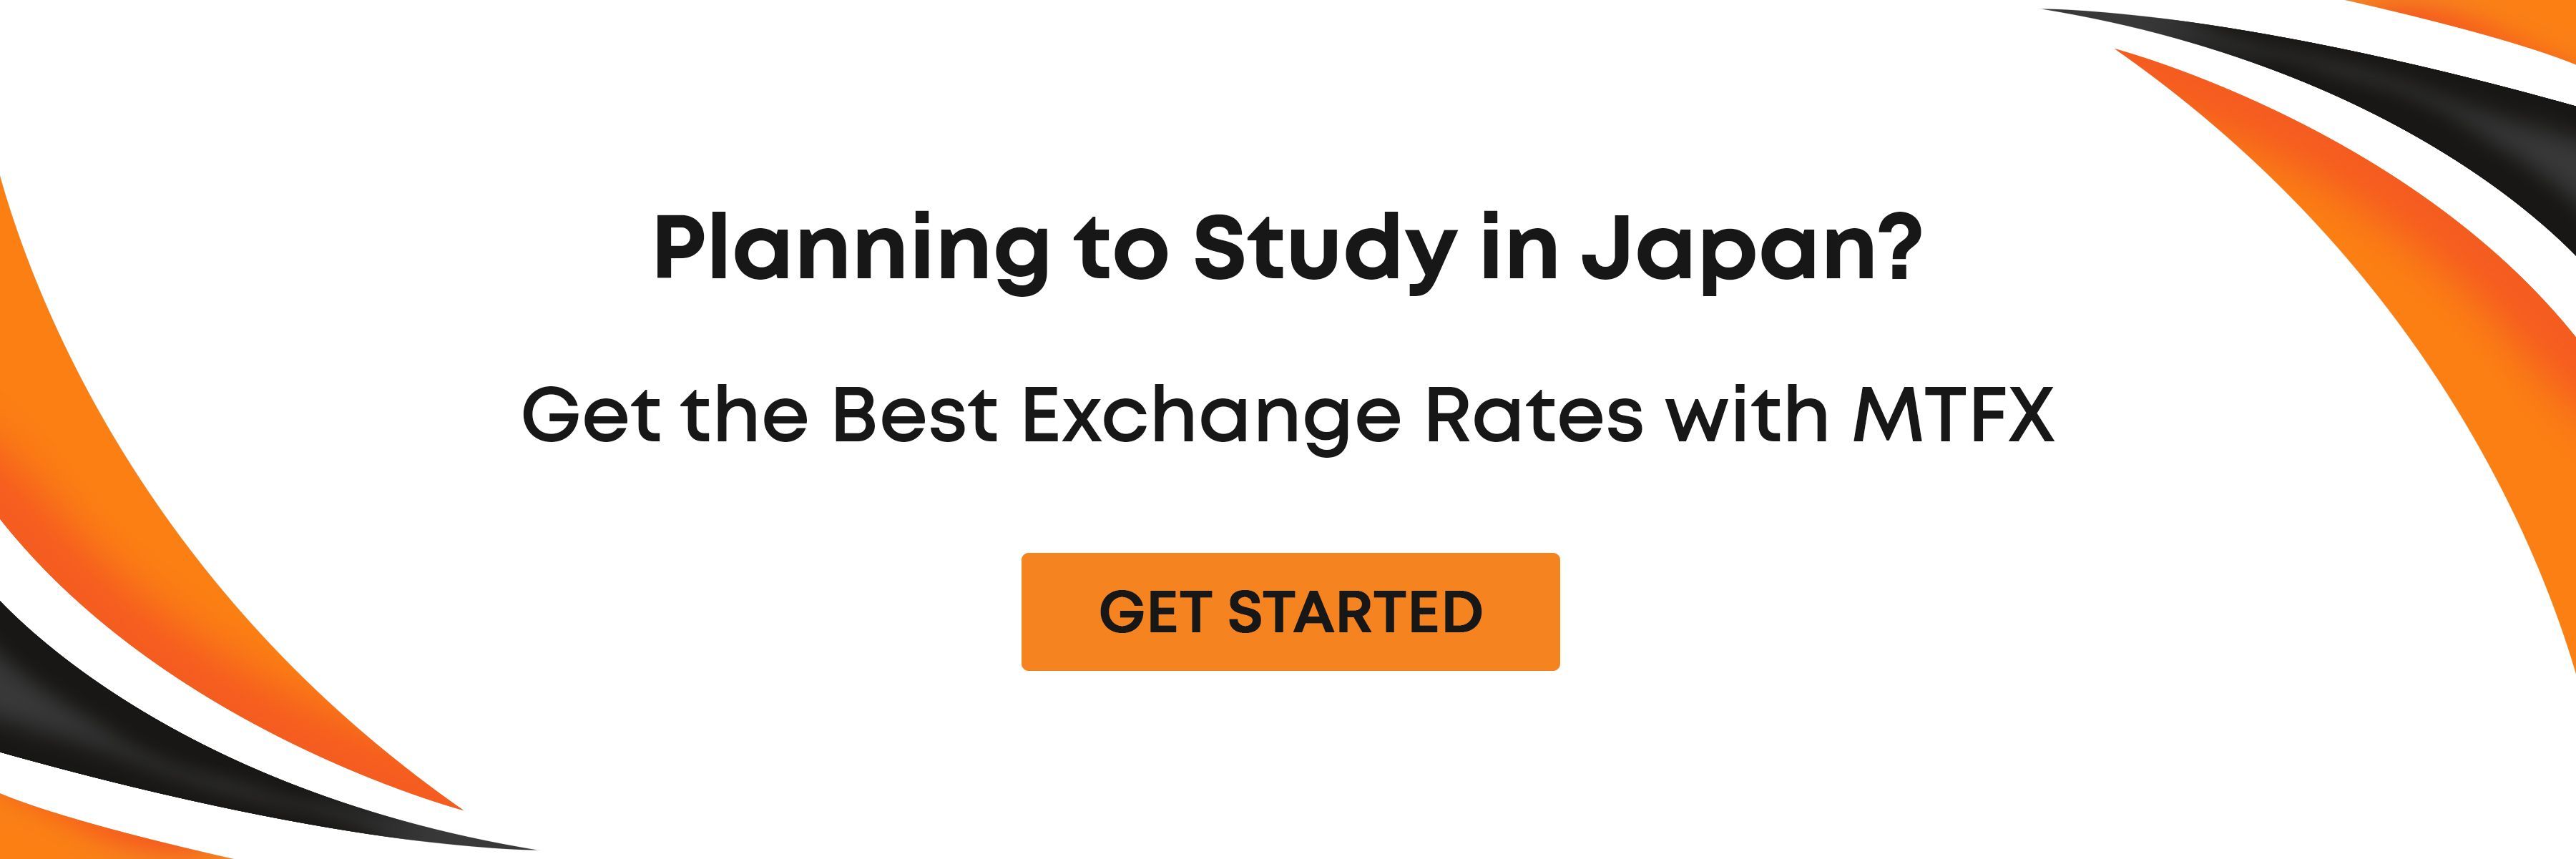 Planning to study in Japan?